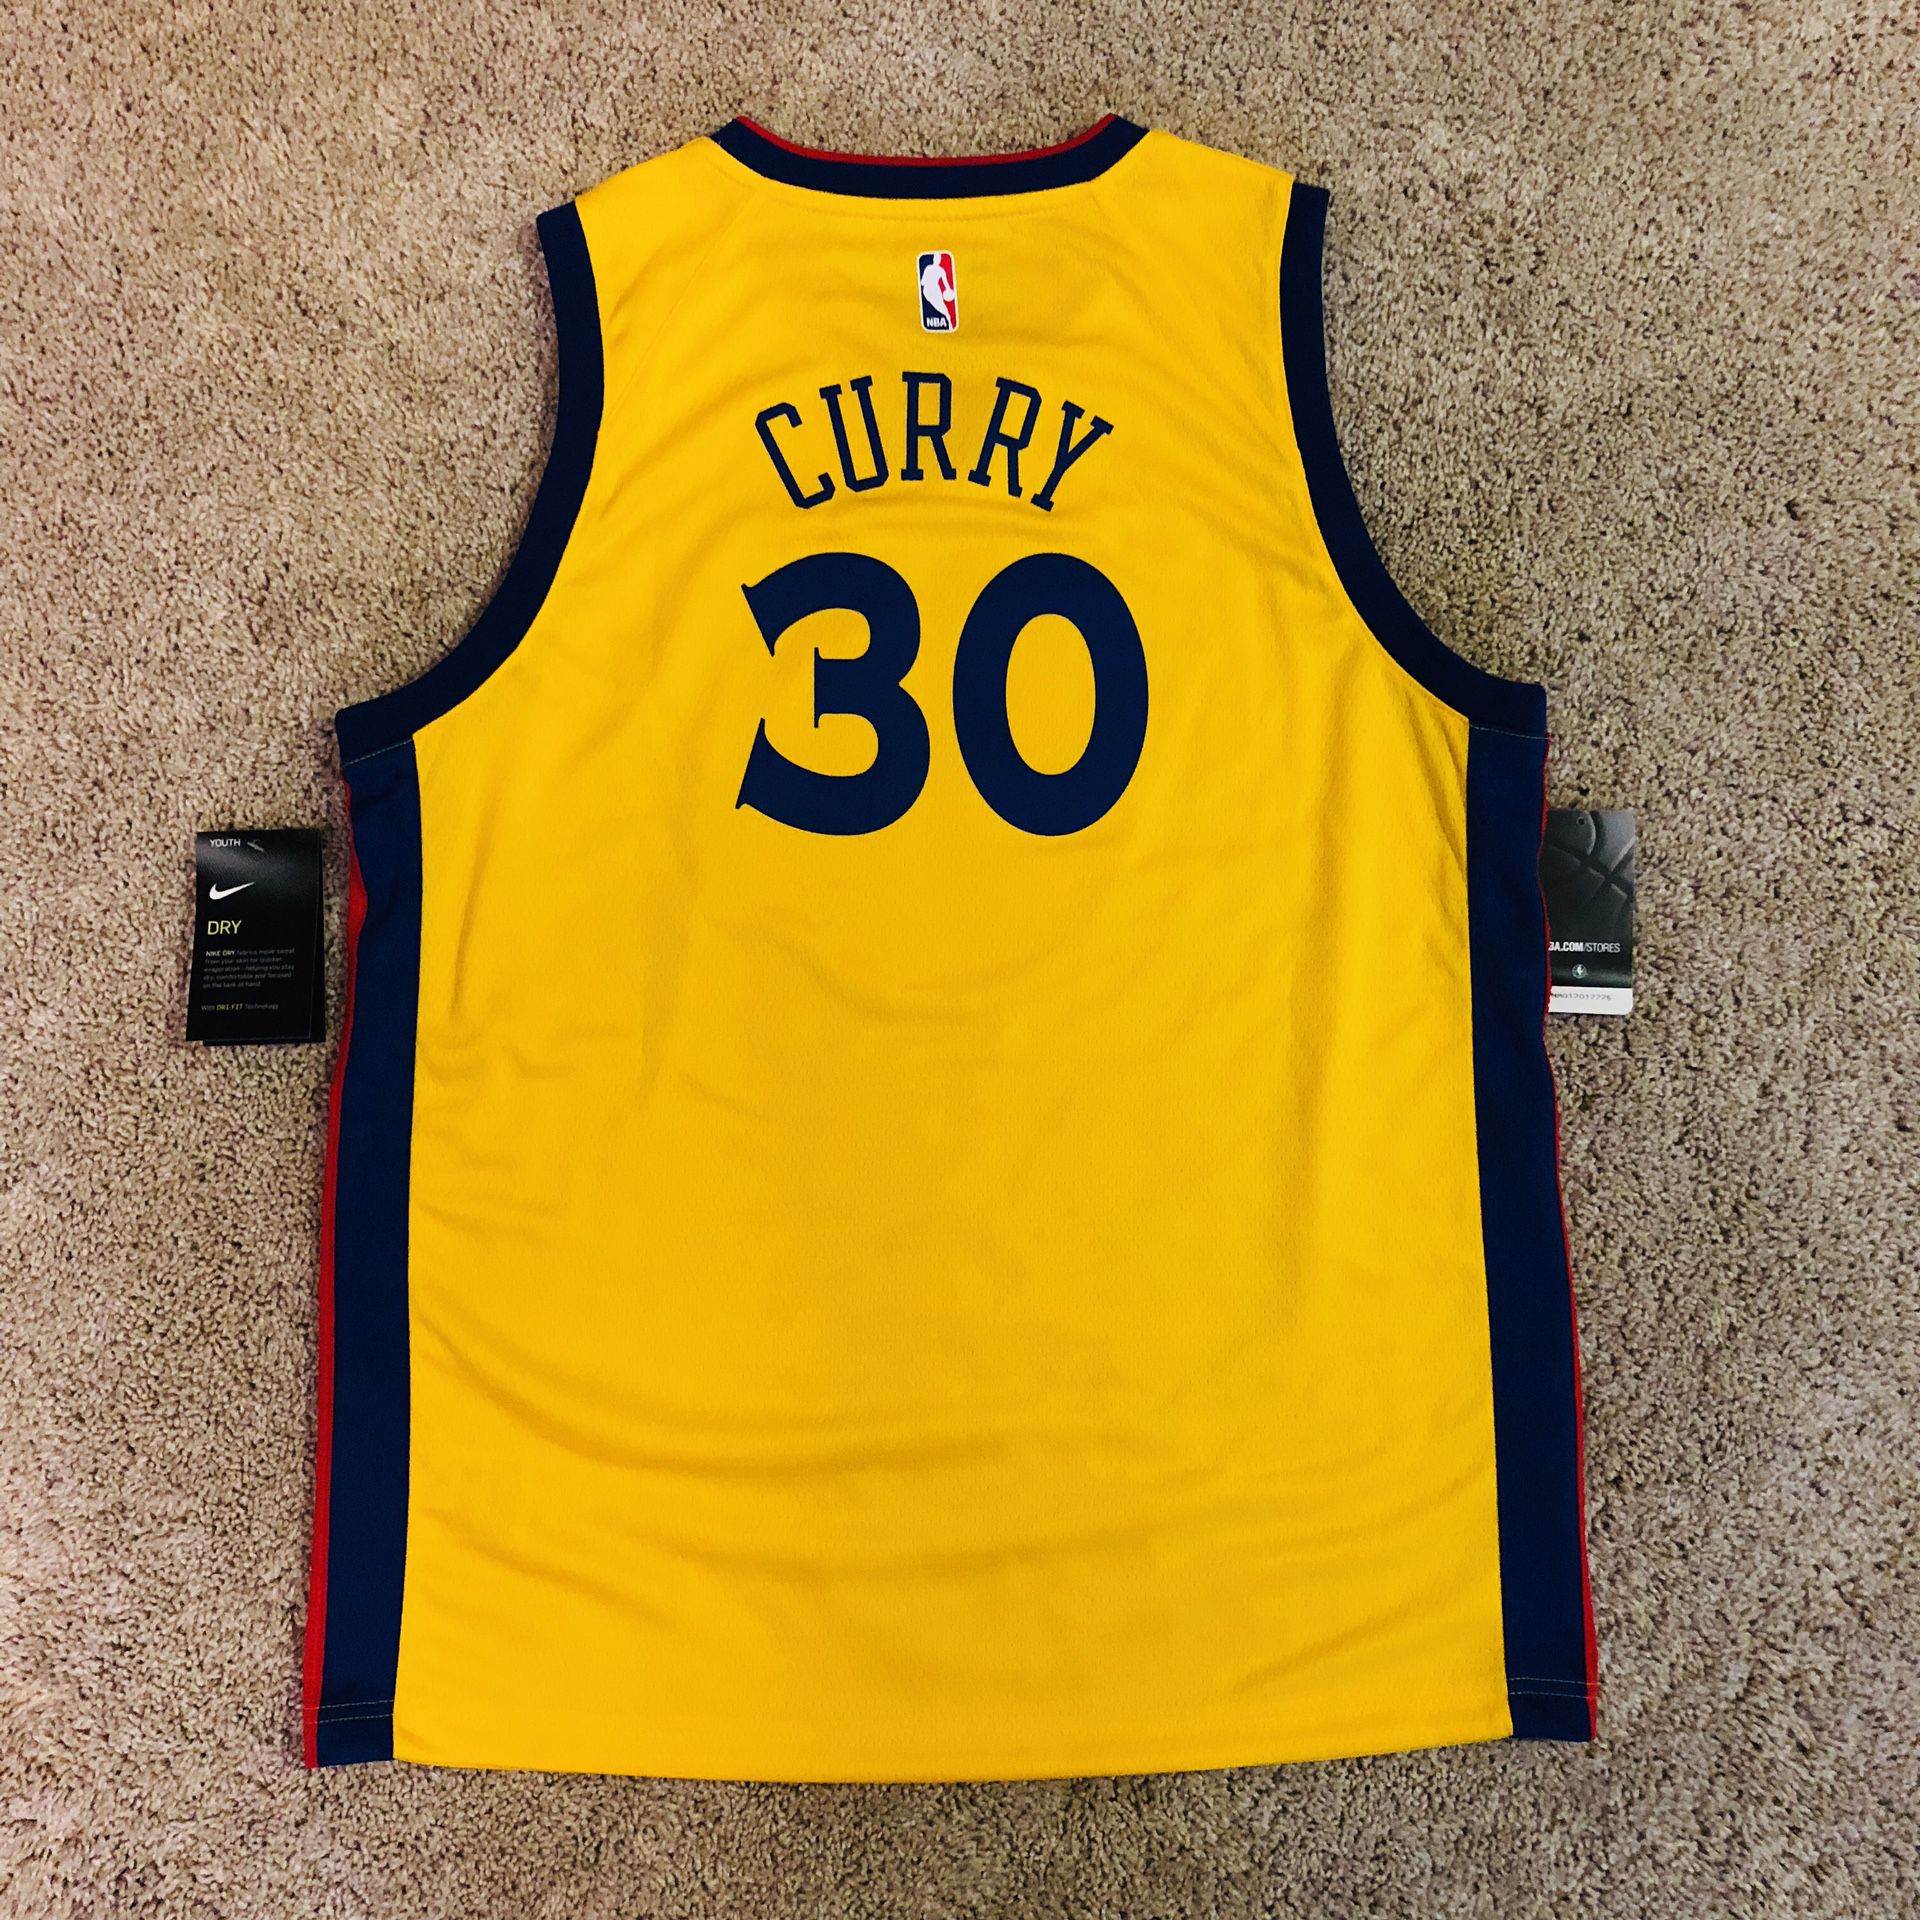 2016 NBA All Star Stephen Curry Jersey Youth Medium for Sale in Hayward, CA  - OfferUp